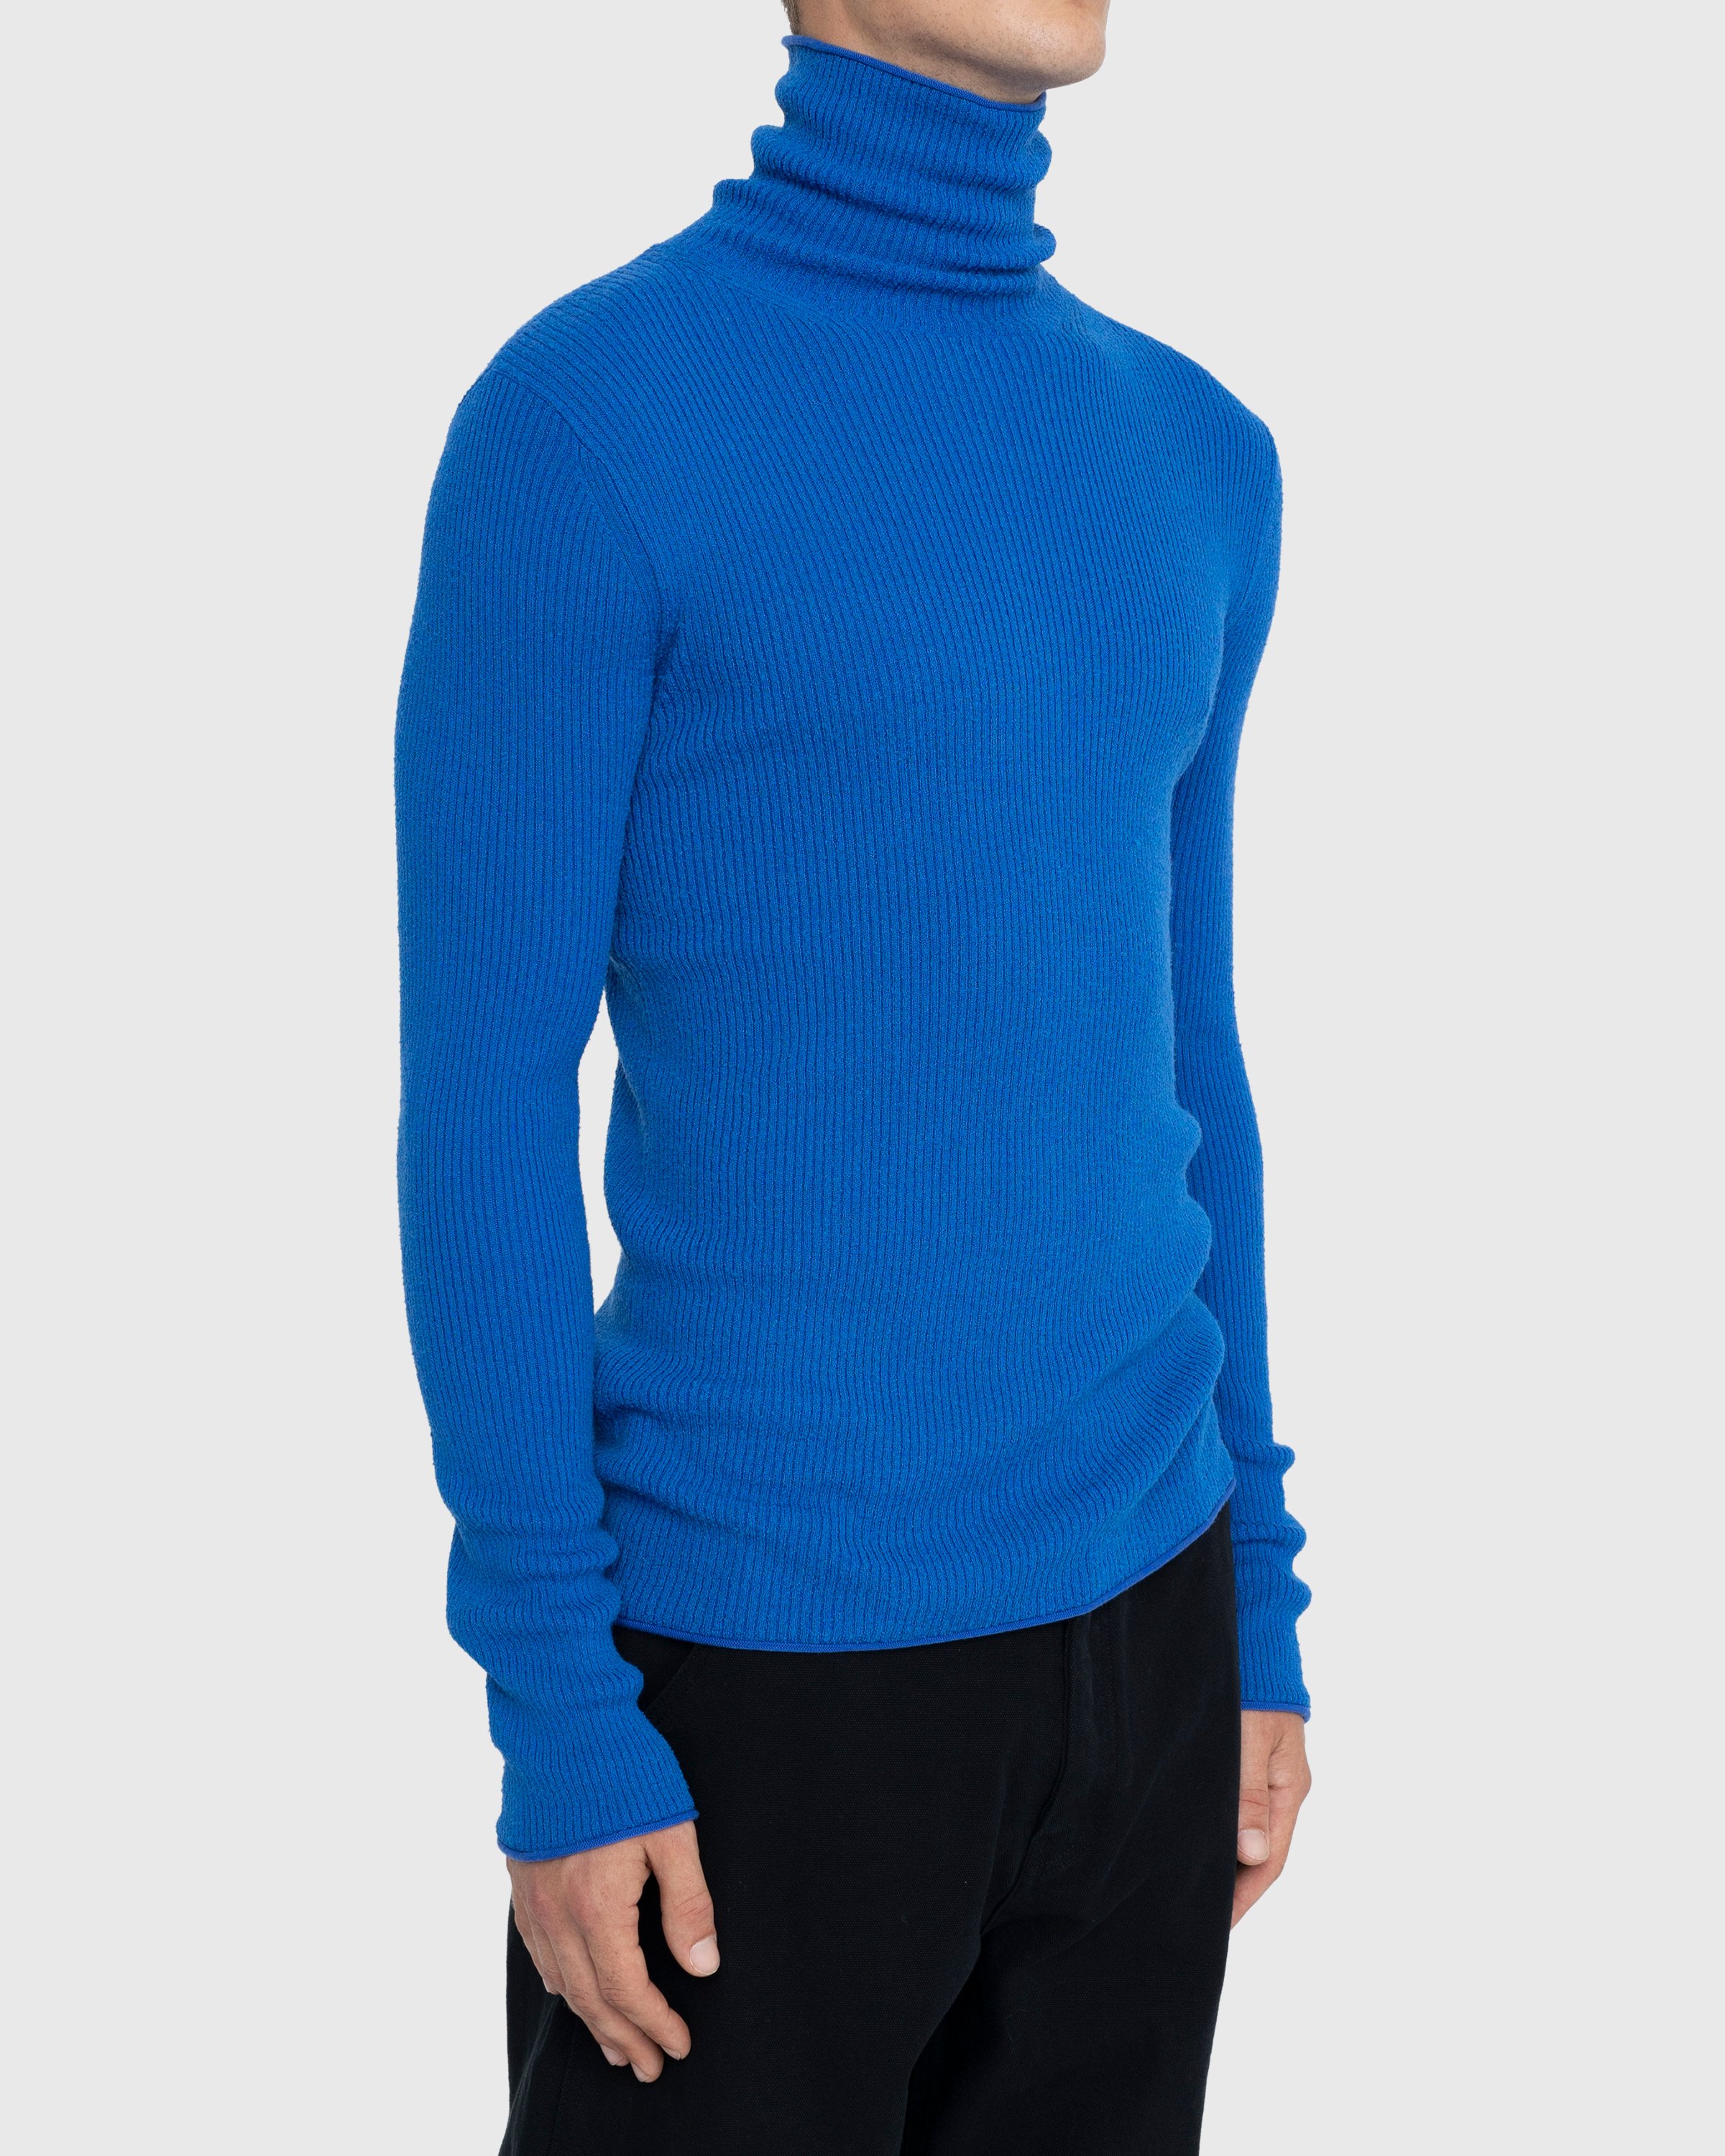 Acne Studios - Roll Neck Ribbed Knit Sweater Ultramarine Blue - Clothing - Blue - Image 3